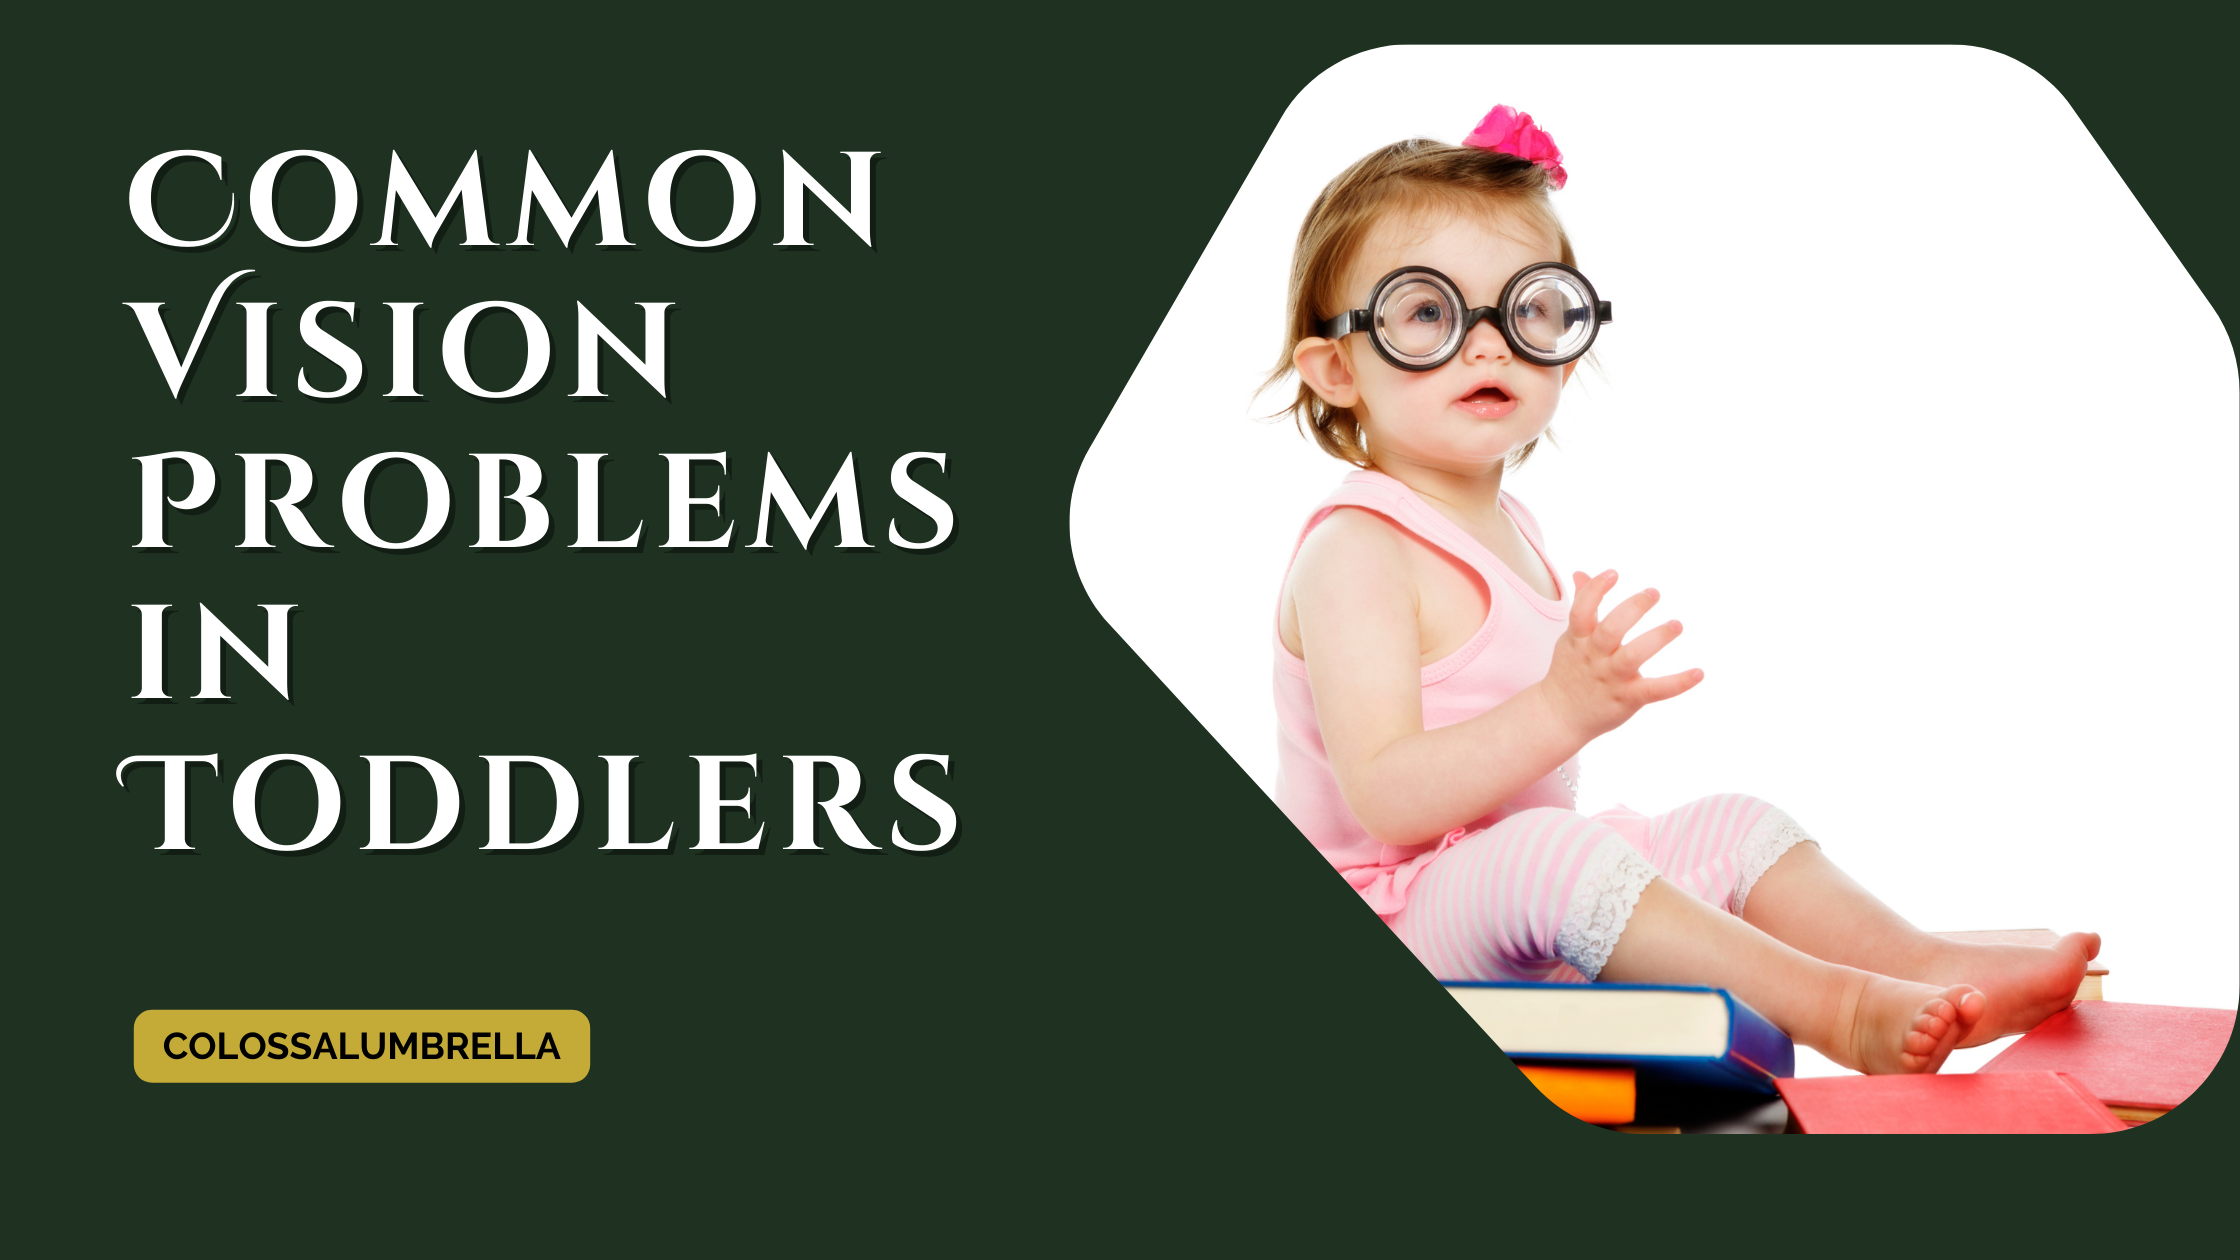 9 Common Vision Problems in Toddlers – What you should know